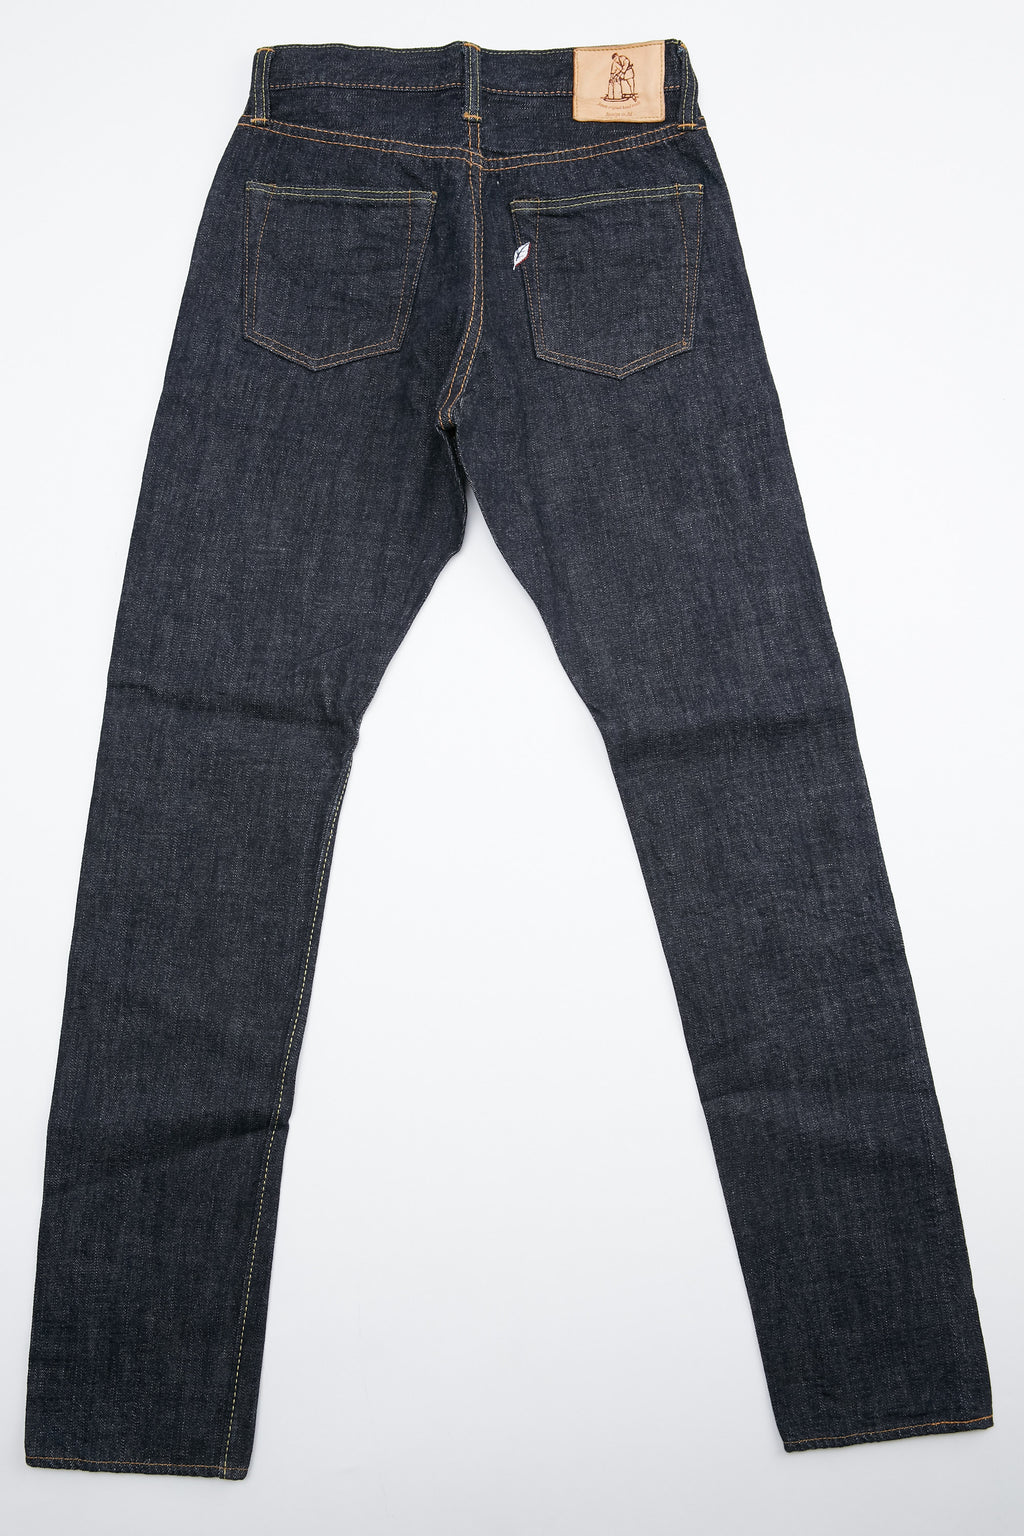 Pure Blue Japan XX-019 14 oz. Relaxed Tapered - Indigo with One Wash ...